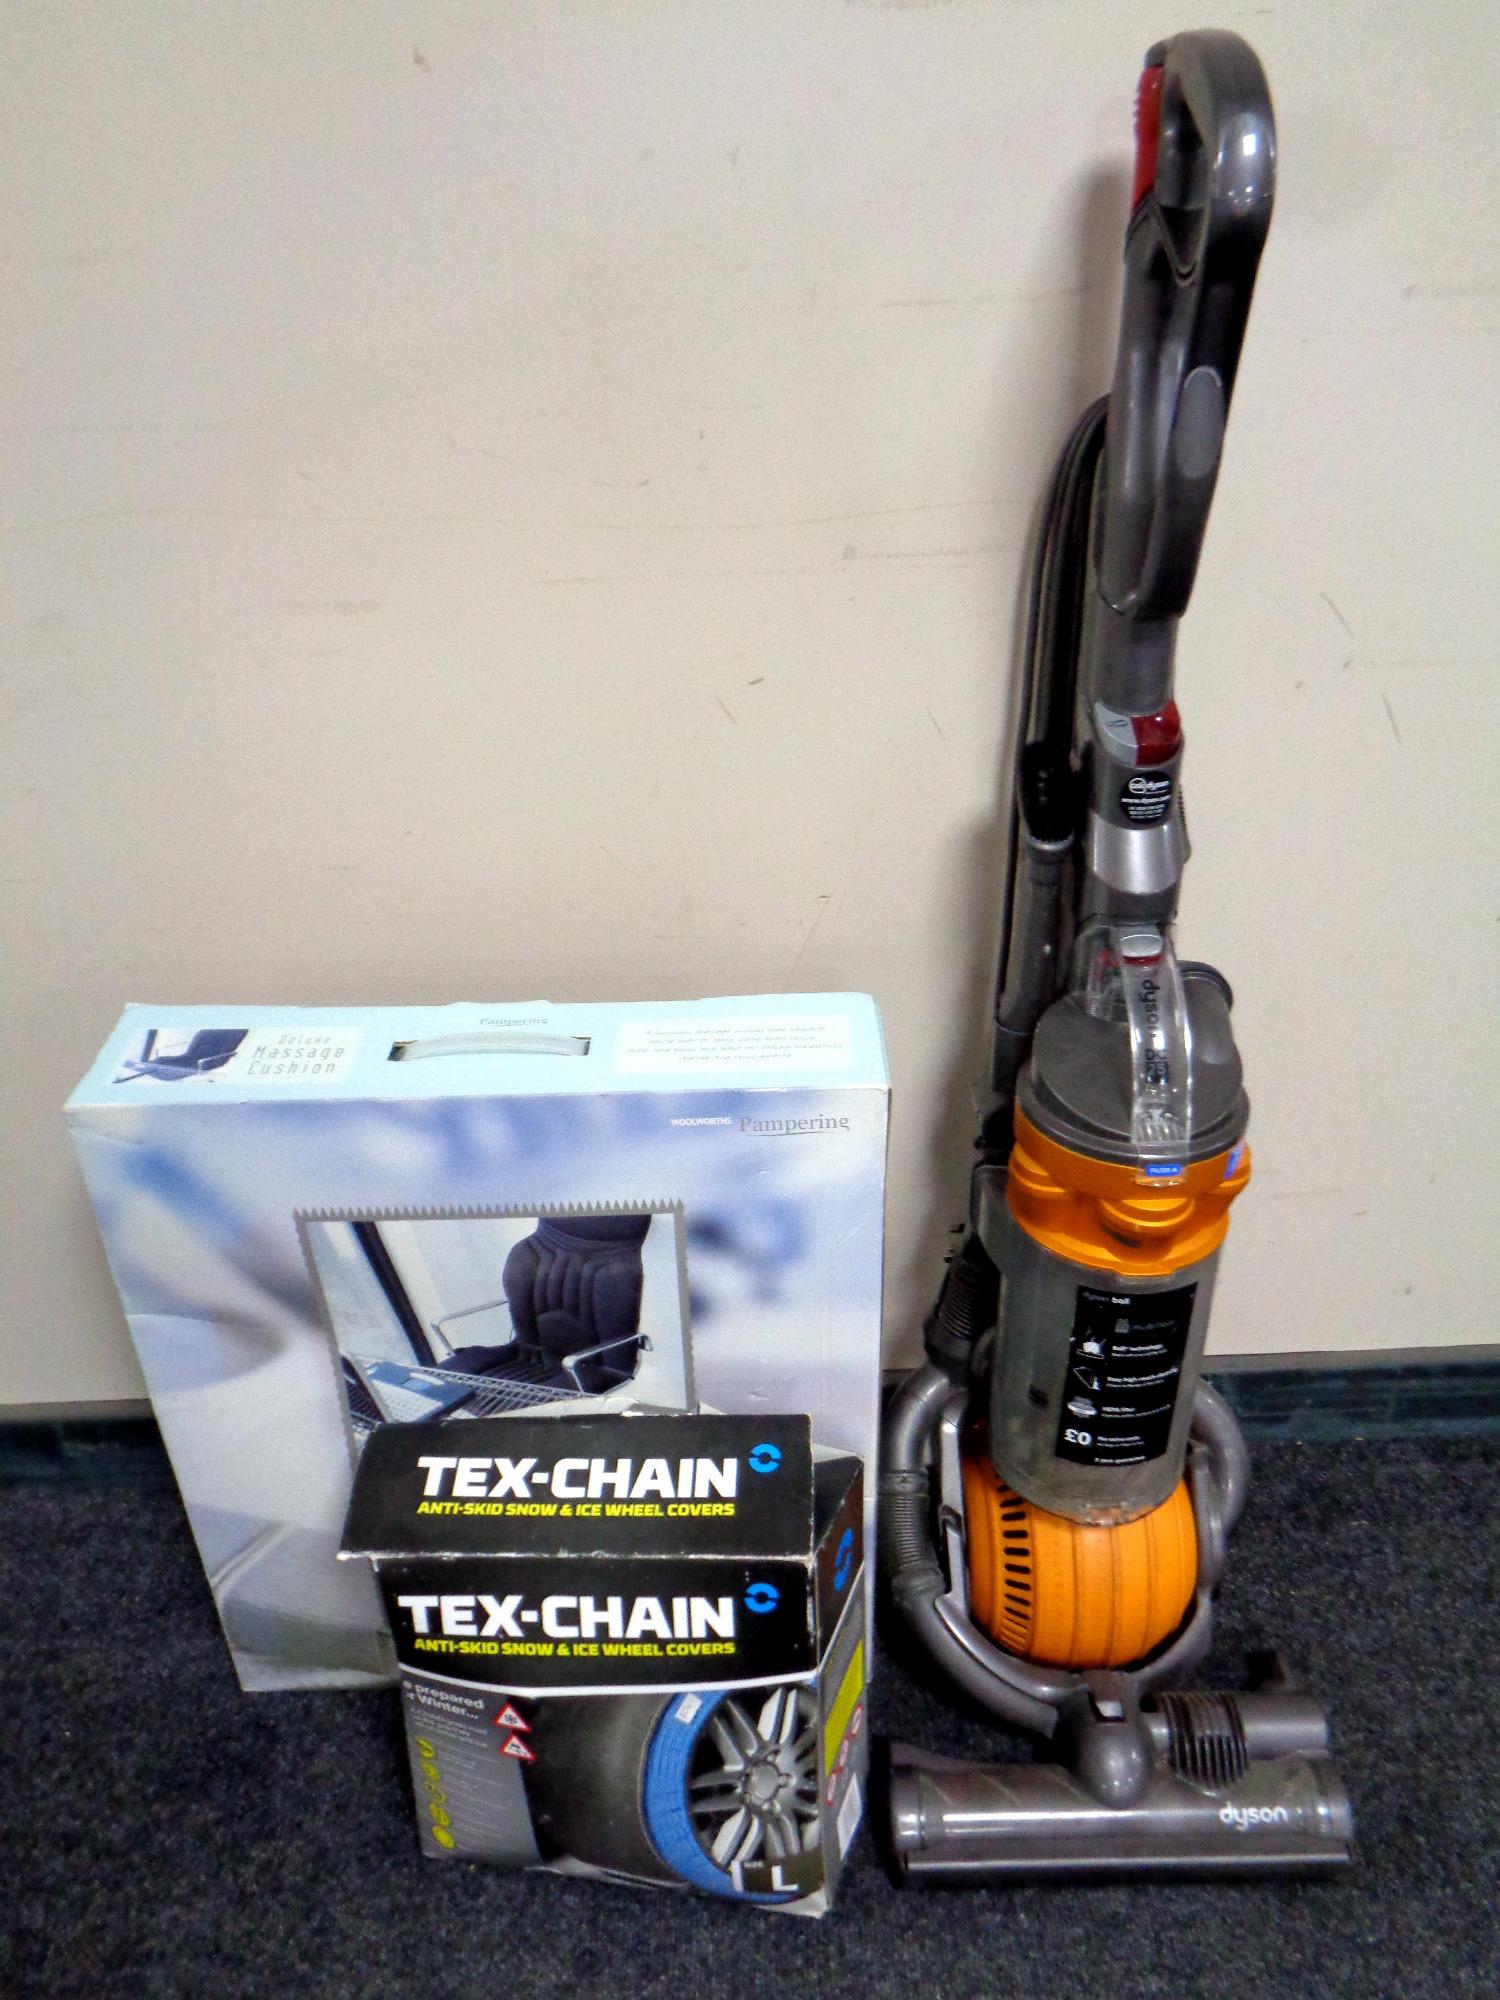 A Dyson DC25 ball vacuum together with a boxed Deluxe massage cushion and a boxed set of Tex-chain